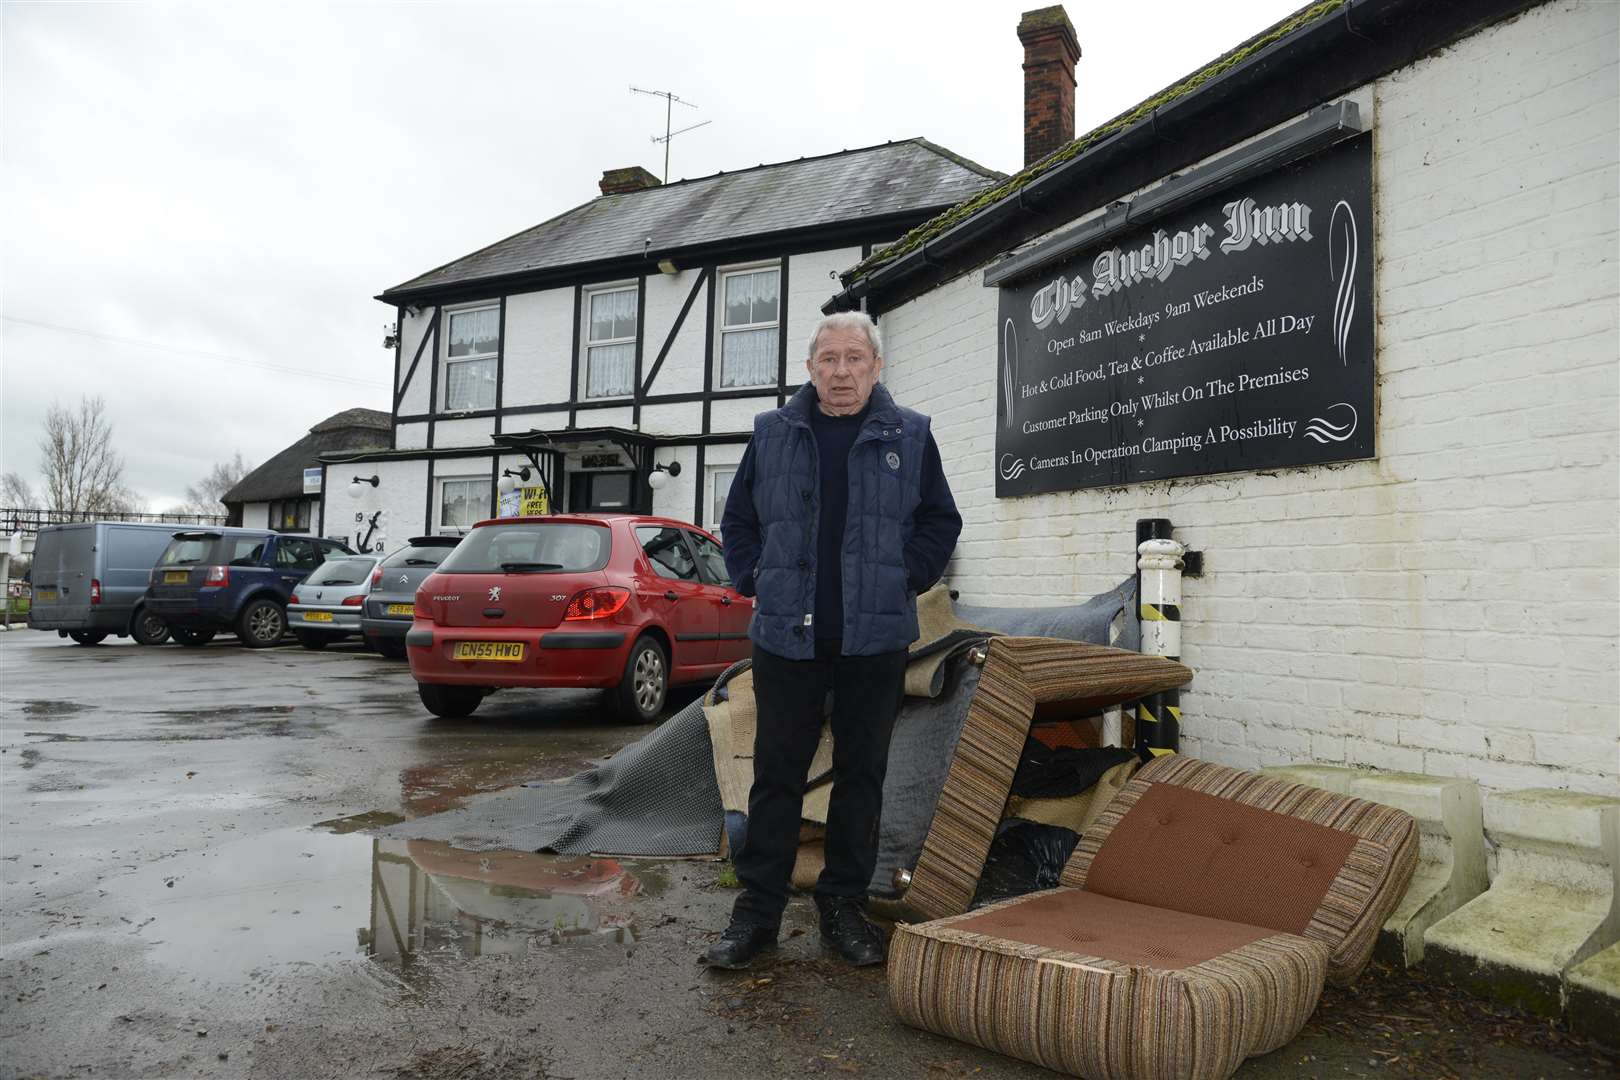 Henry Long was picked up by a neighbour with a boat on Christmas Day from the Anchor Inn & Hotel in Yalding. Picture: Martin Apps